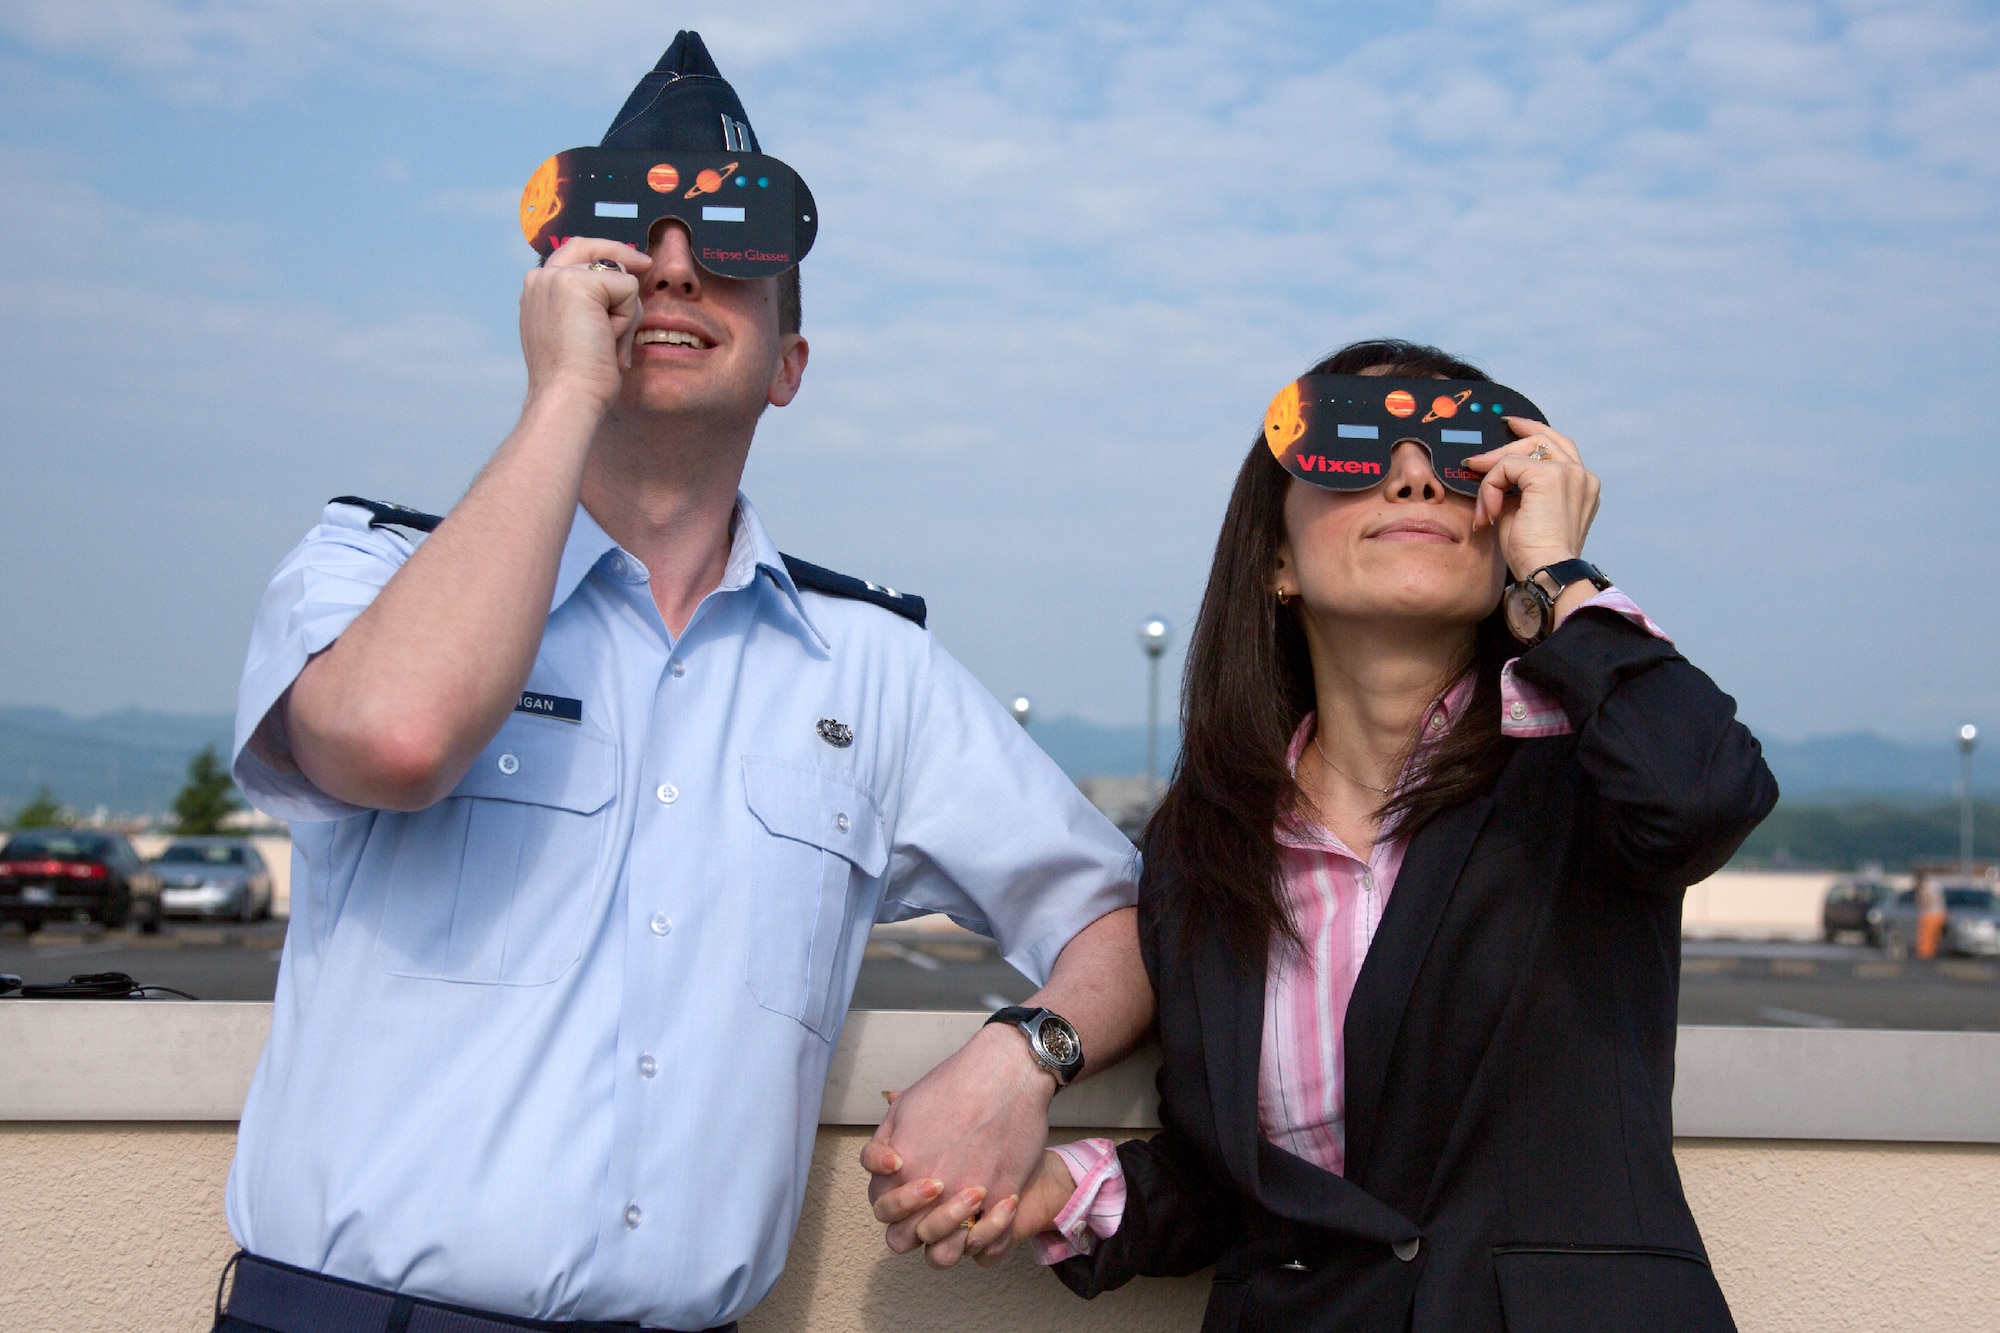 YOKOTA AIR BASE, Japan -- Capt. Drew Jernigan, 374th Airlift Wing legal office, and his wife Makiko enjoy watching the annular solar eclipse at Yokota Air Base, Japan, May 21, 2012. The annular solar eclipse, takes place when the moon covers as much as 94 percent of the sun resulting in a "ring of fire". (U.S. Air Force photo by Osakabe Yasuo)